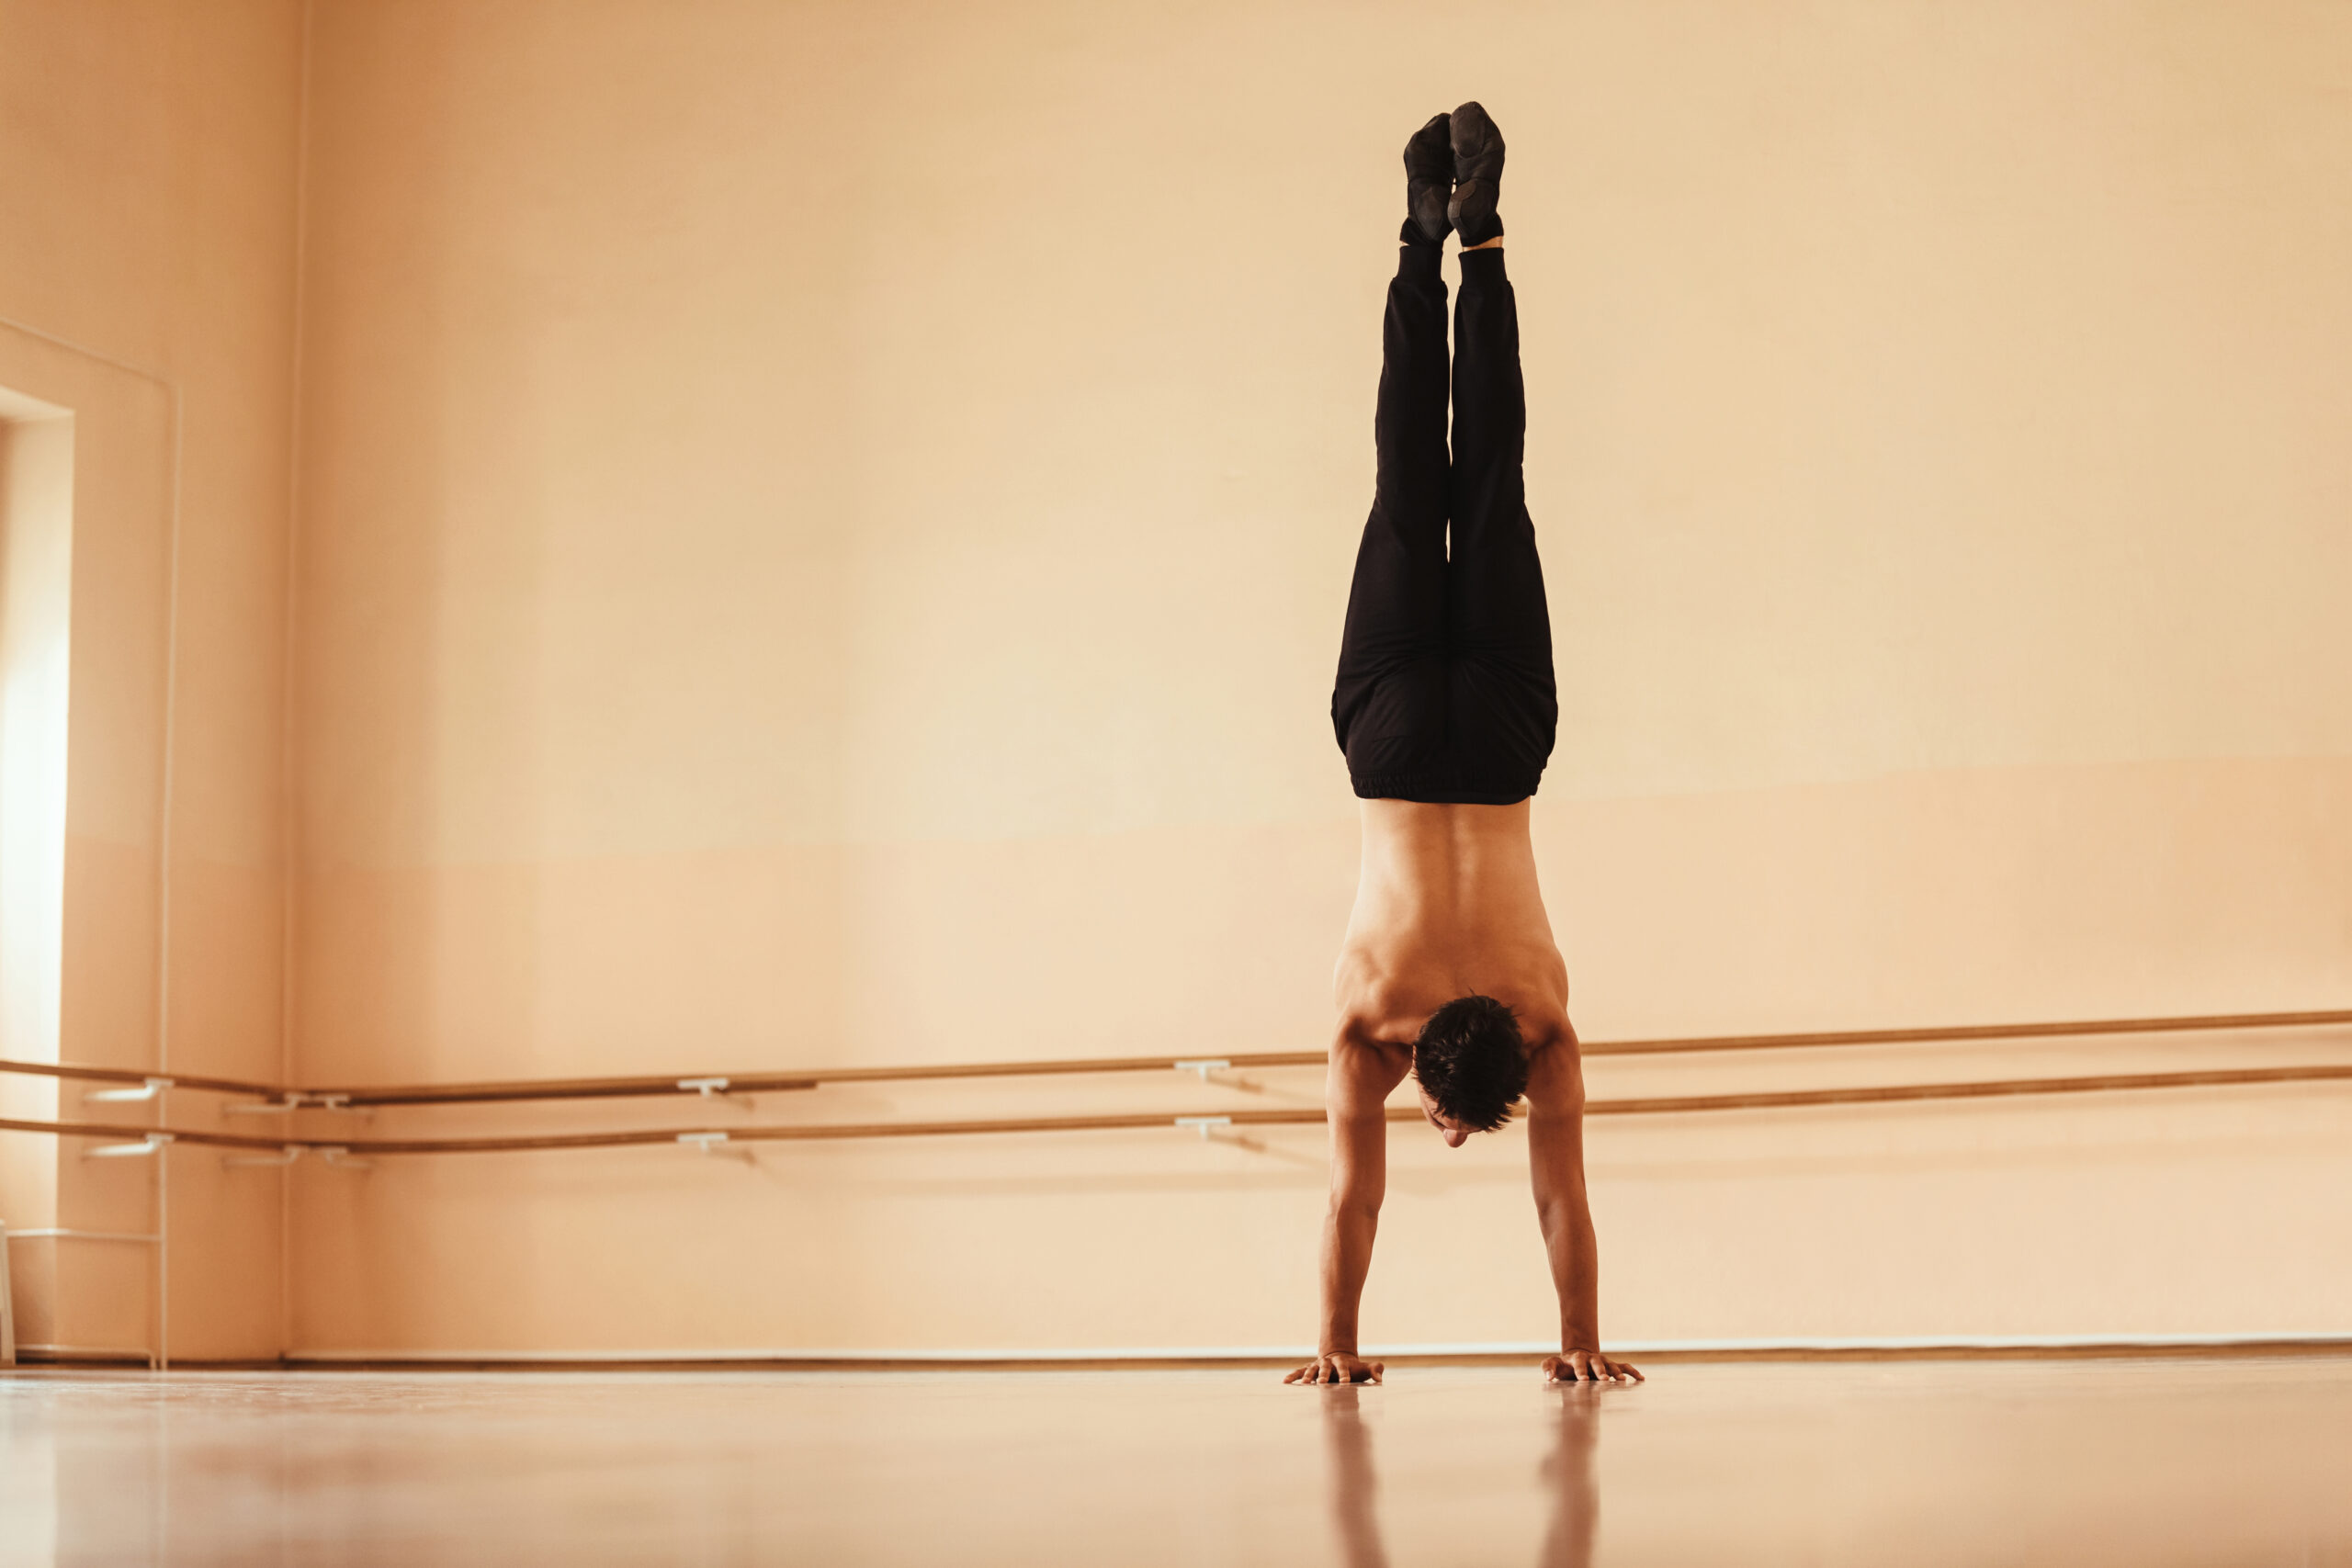 Rear view of male dancer doing handstand at dance studio.